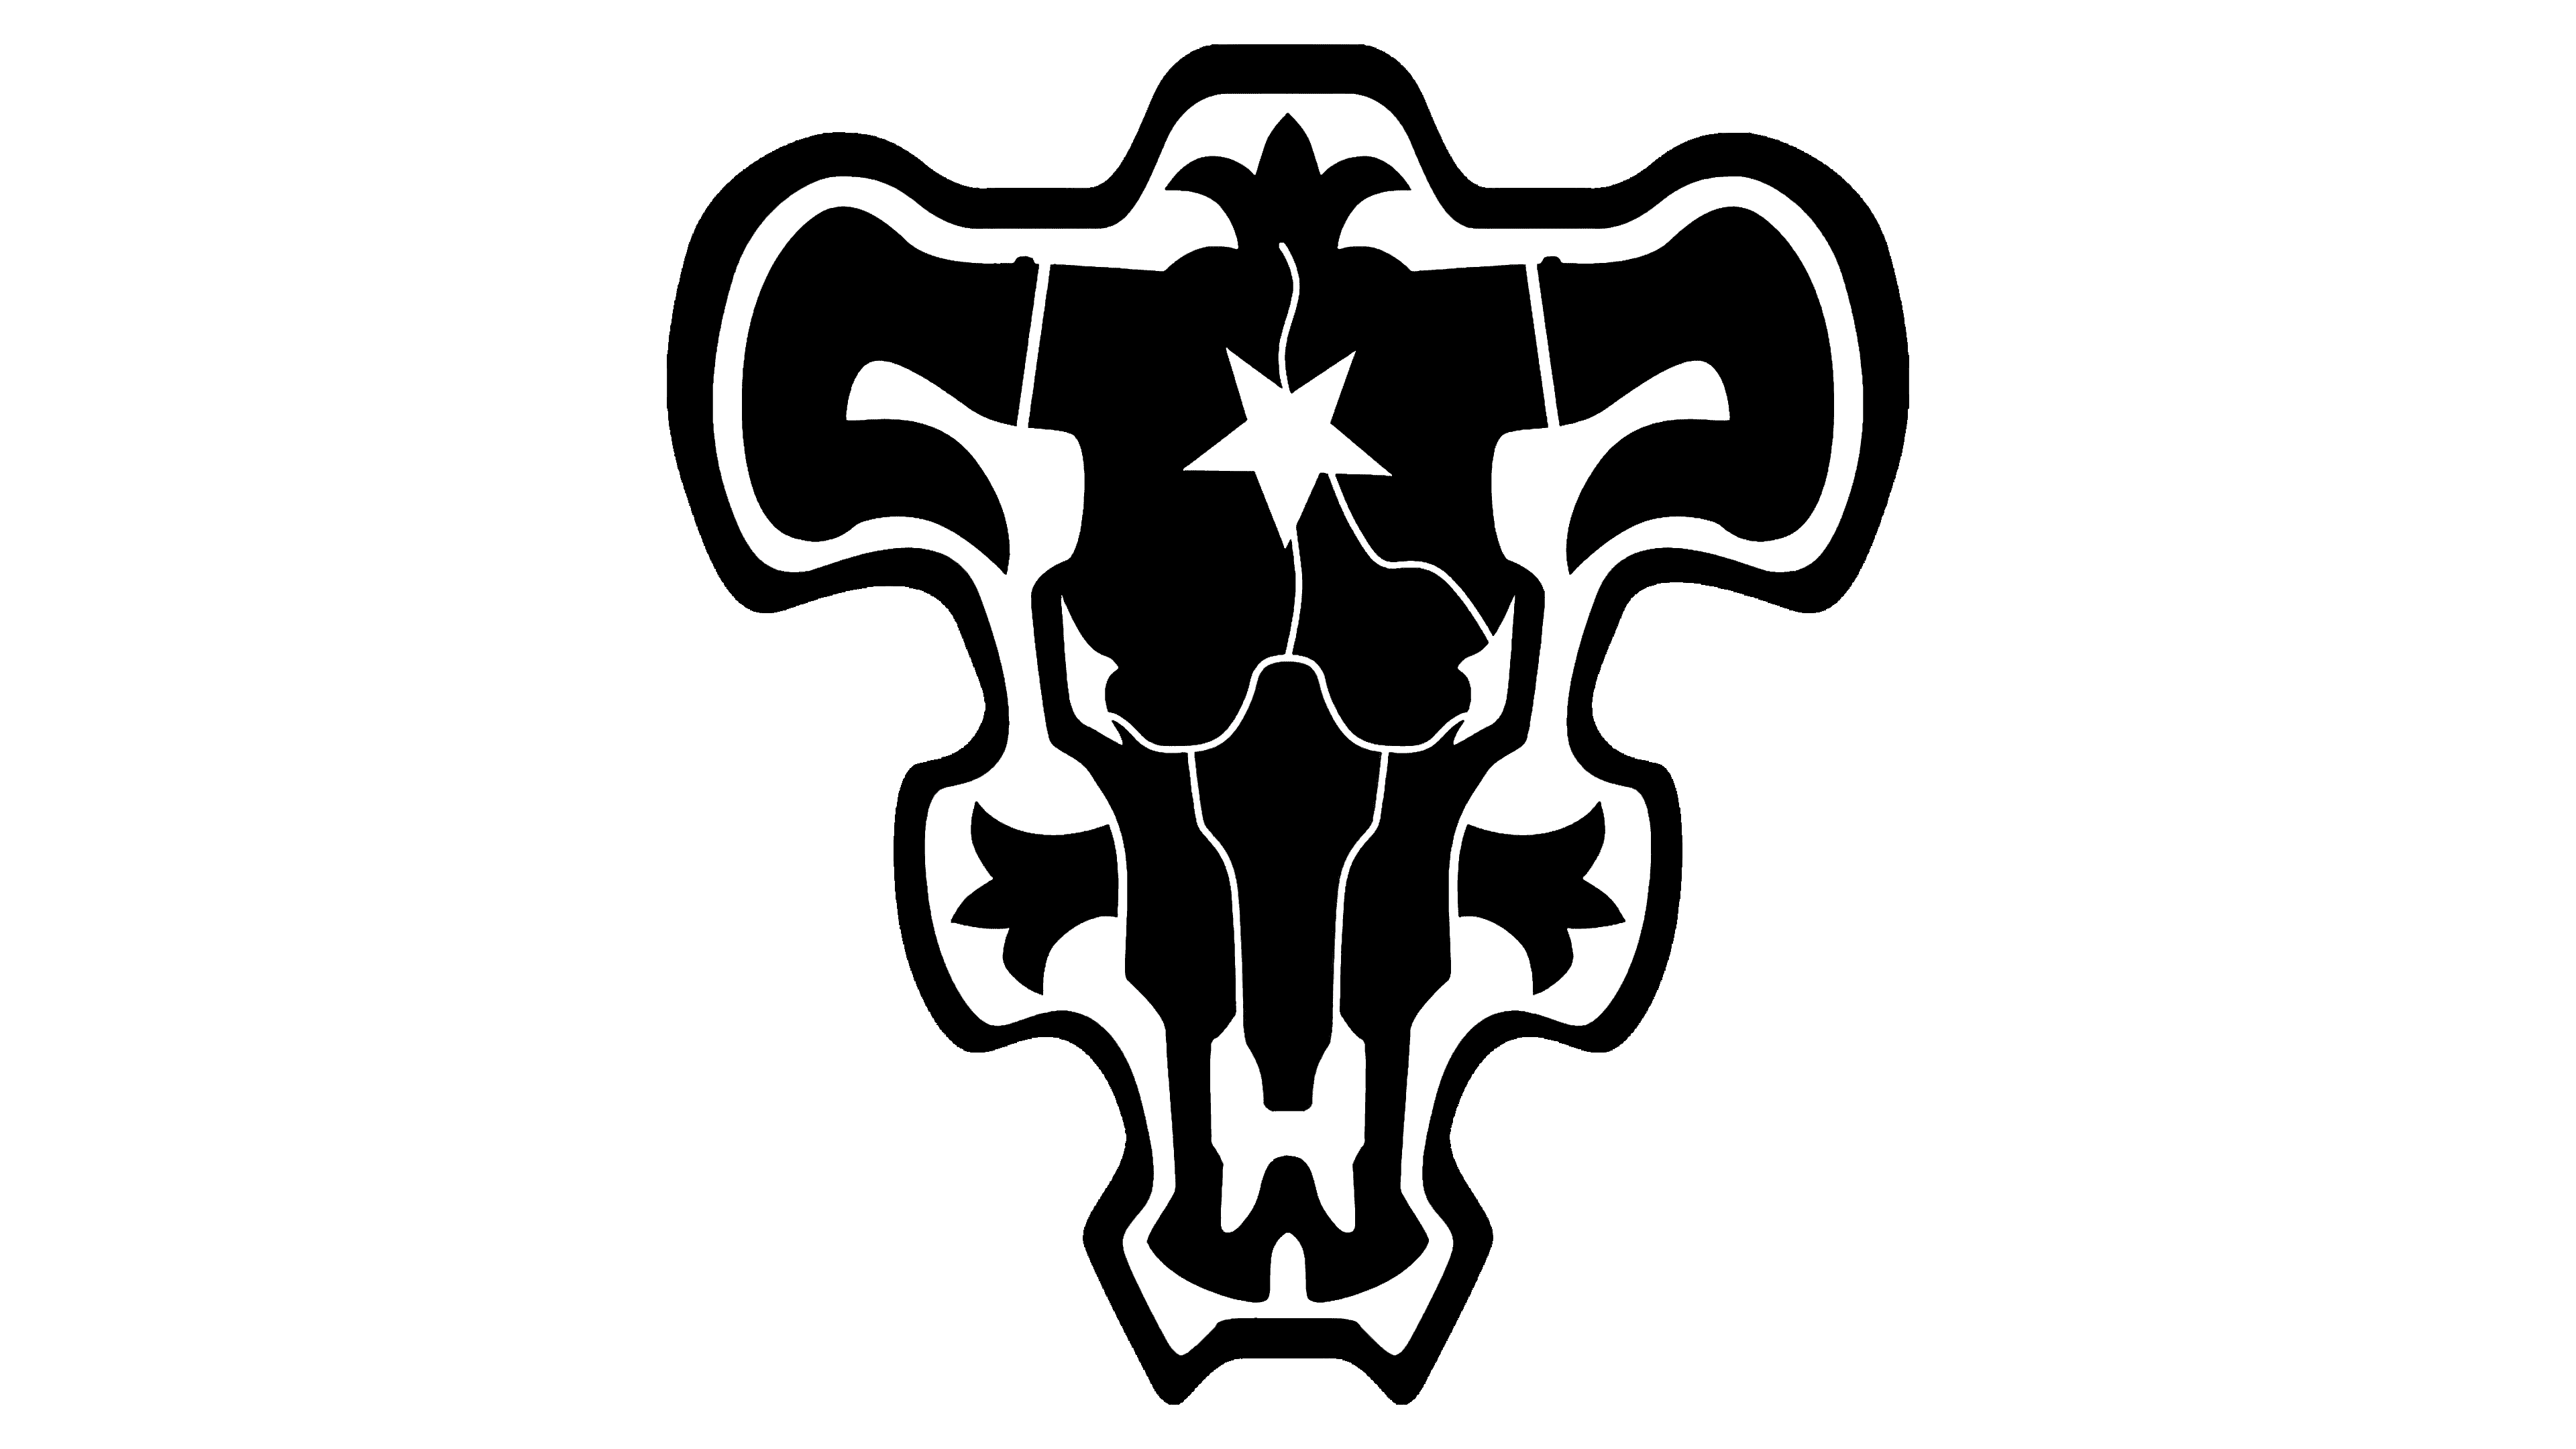 Chicago Bulls Logo and symbol, meaning, history, PNG, brand